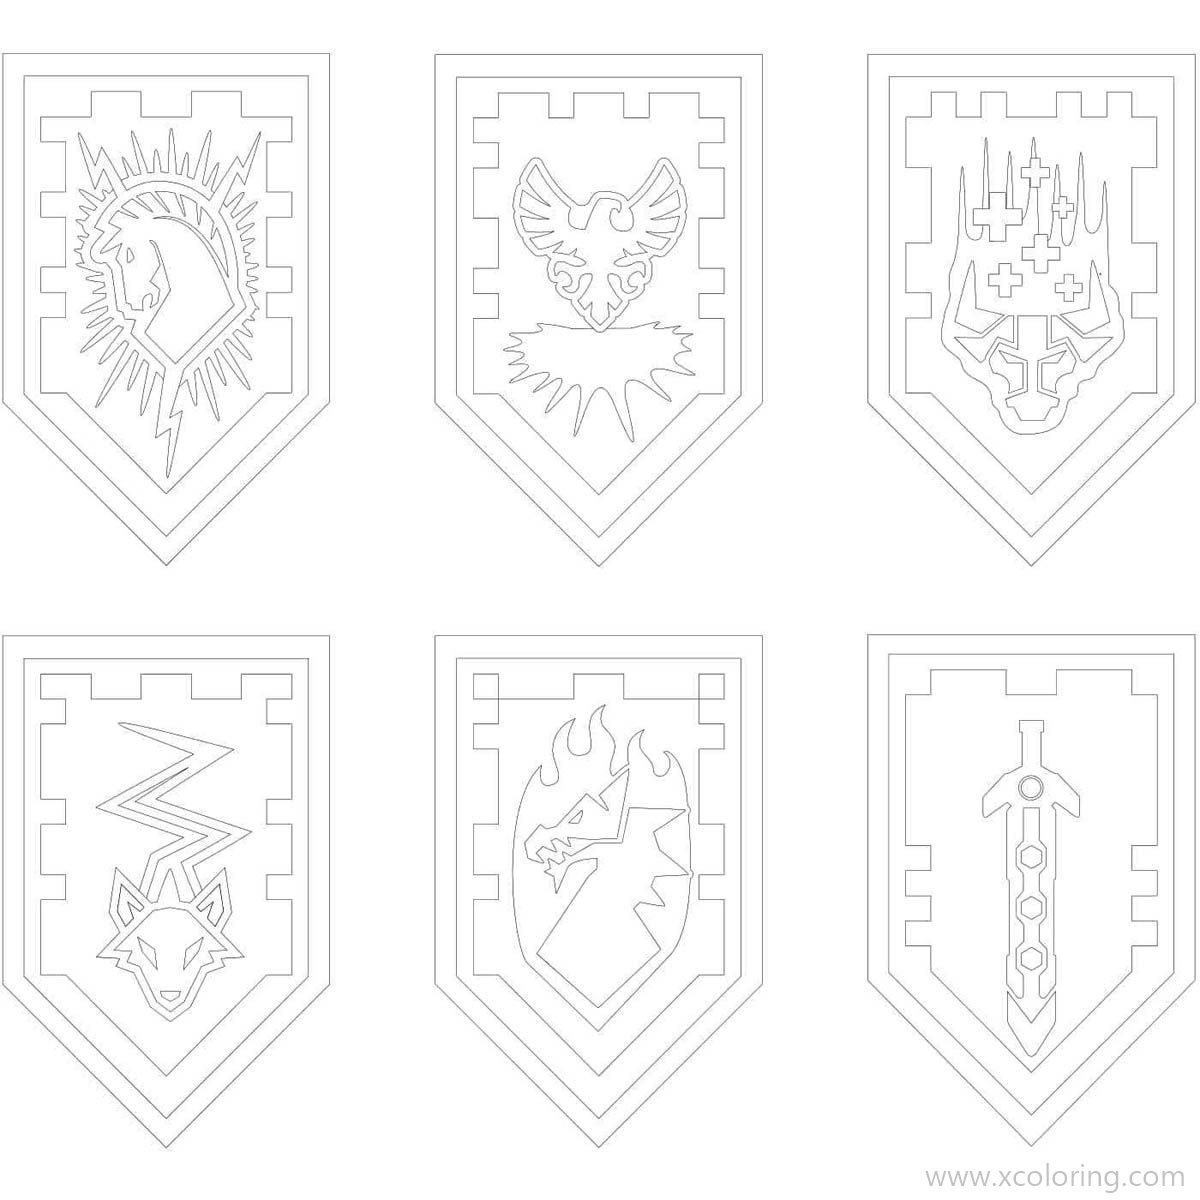 Free Lego Nexo Knights Coloring Pages Six Shields printable